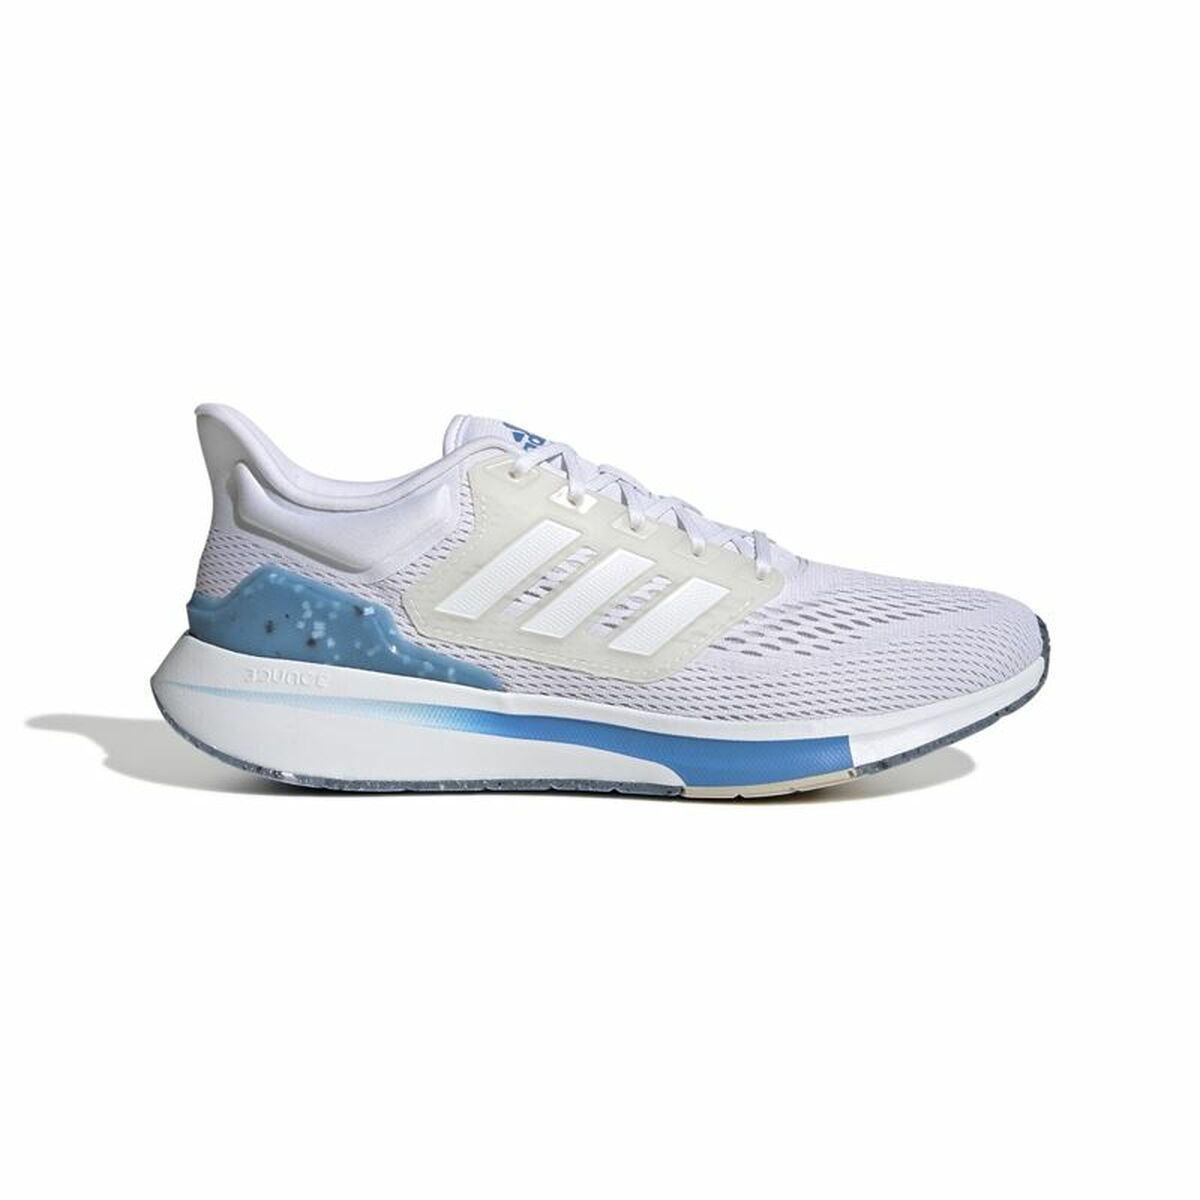 Chaussures de Running pour Adultes Adidas EQ21 Blanc